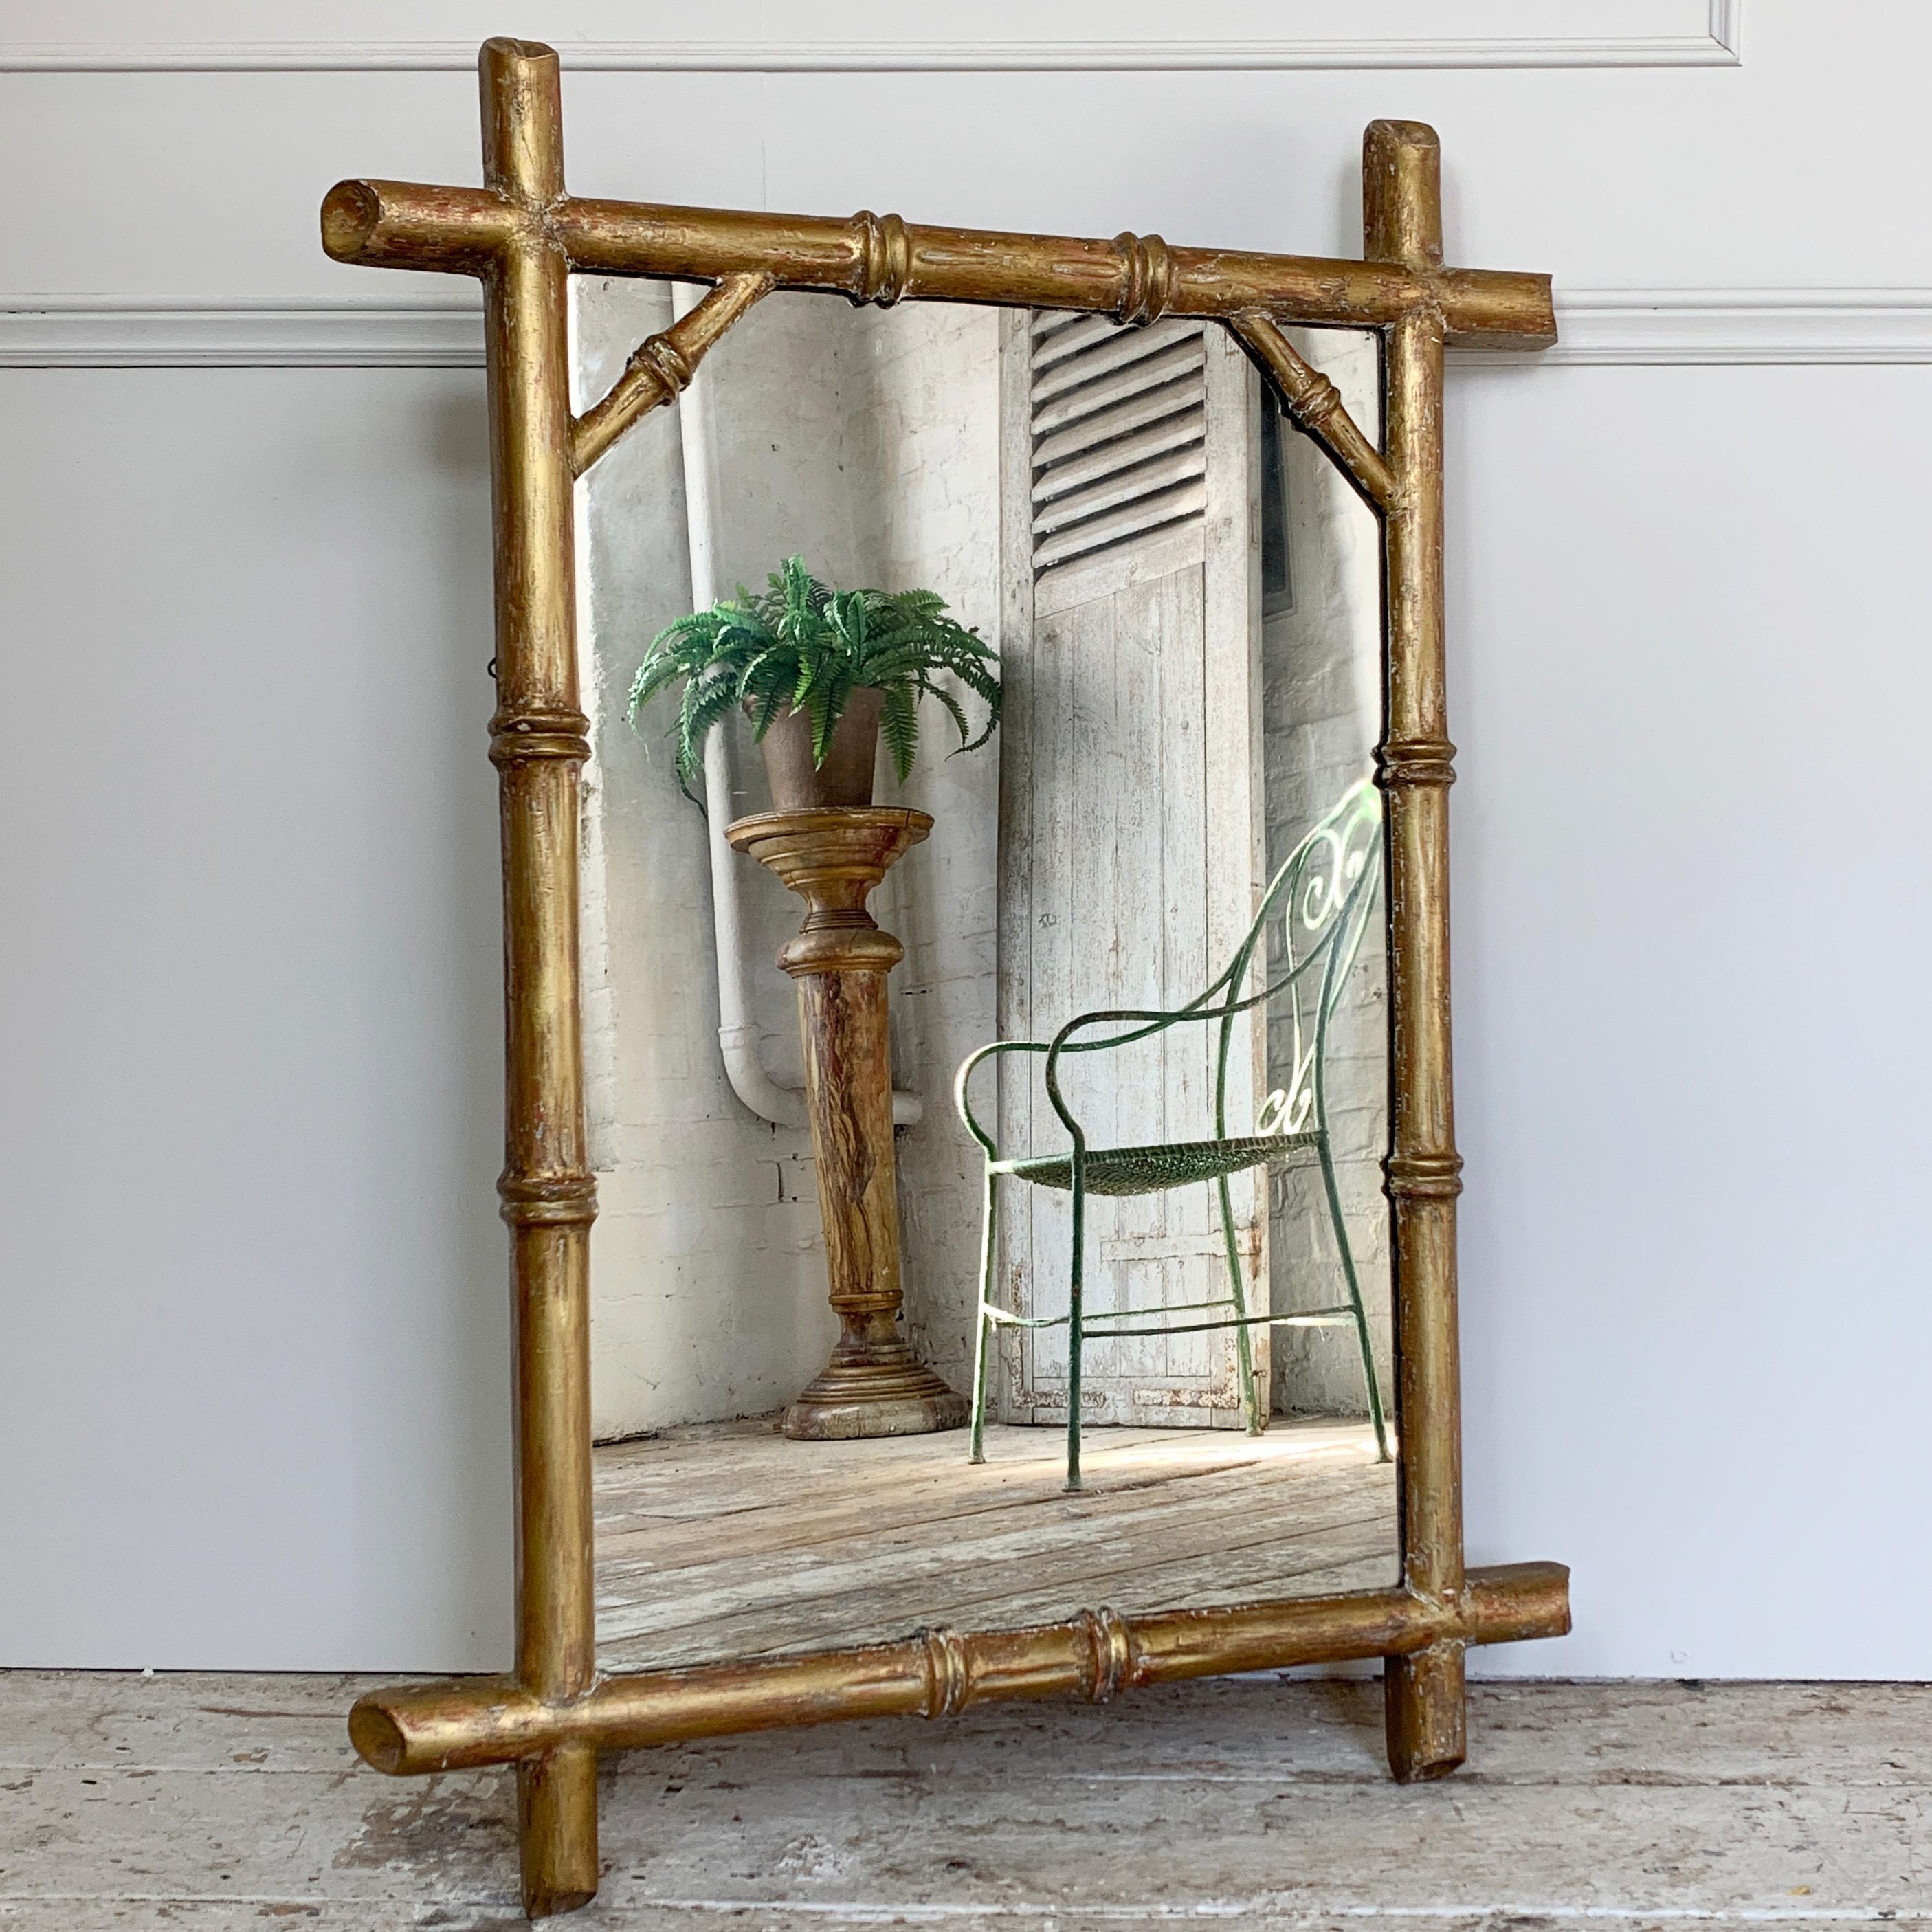 Gilt wood faux bamboo mirror, French, 19th century

The mirror has beautiful wide faux bamboo frame with diagonal corner details. 
Original gilt/gesso finish
Some very light foxing to the mirror plate in areas
Original wooden backboards

99cm